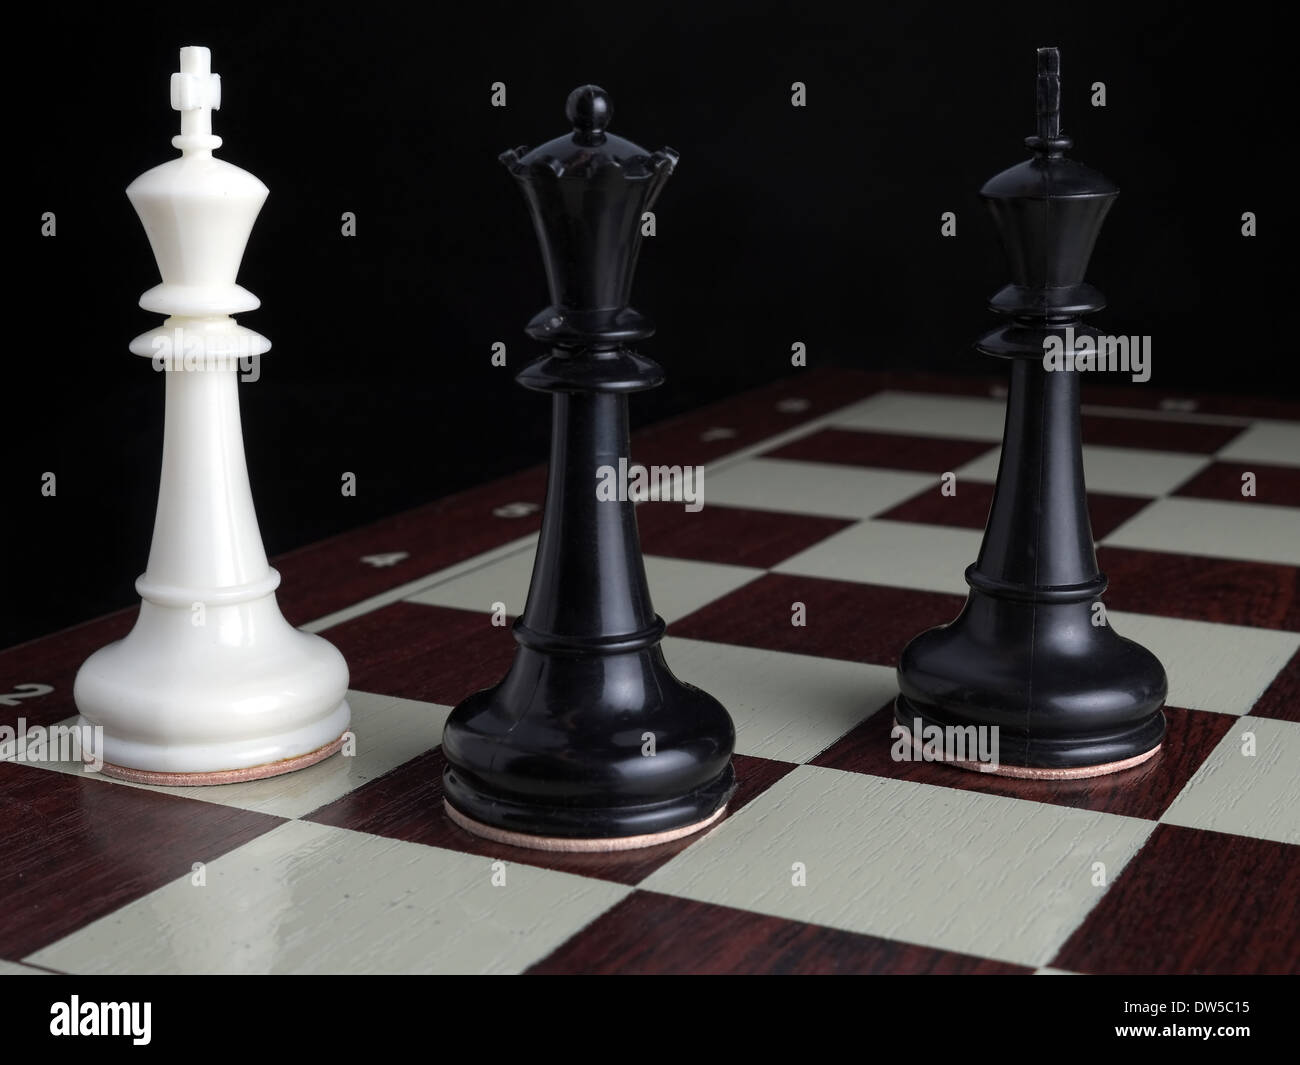 Checkmate the fallen black king with the queen, a pawn and a white